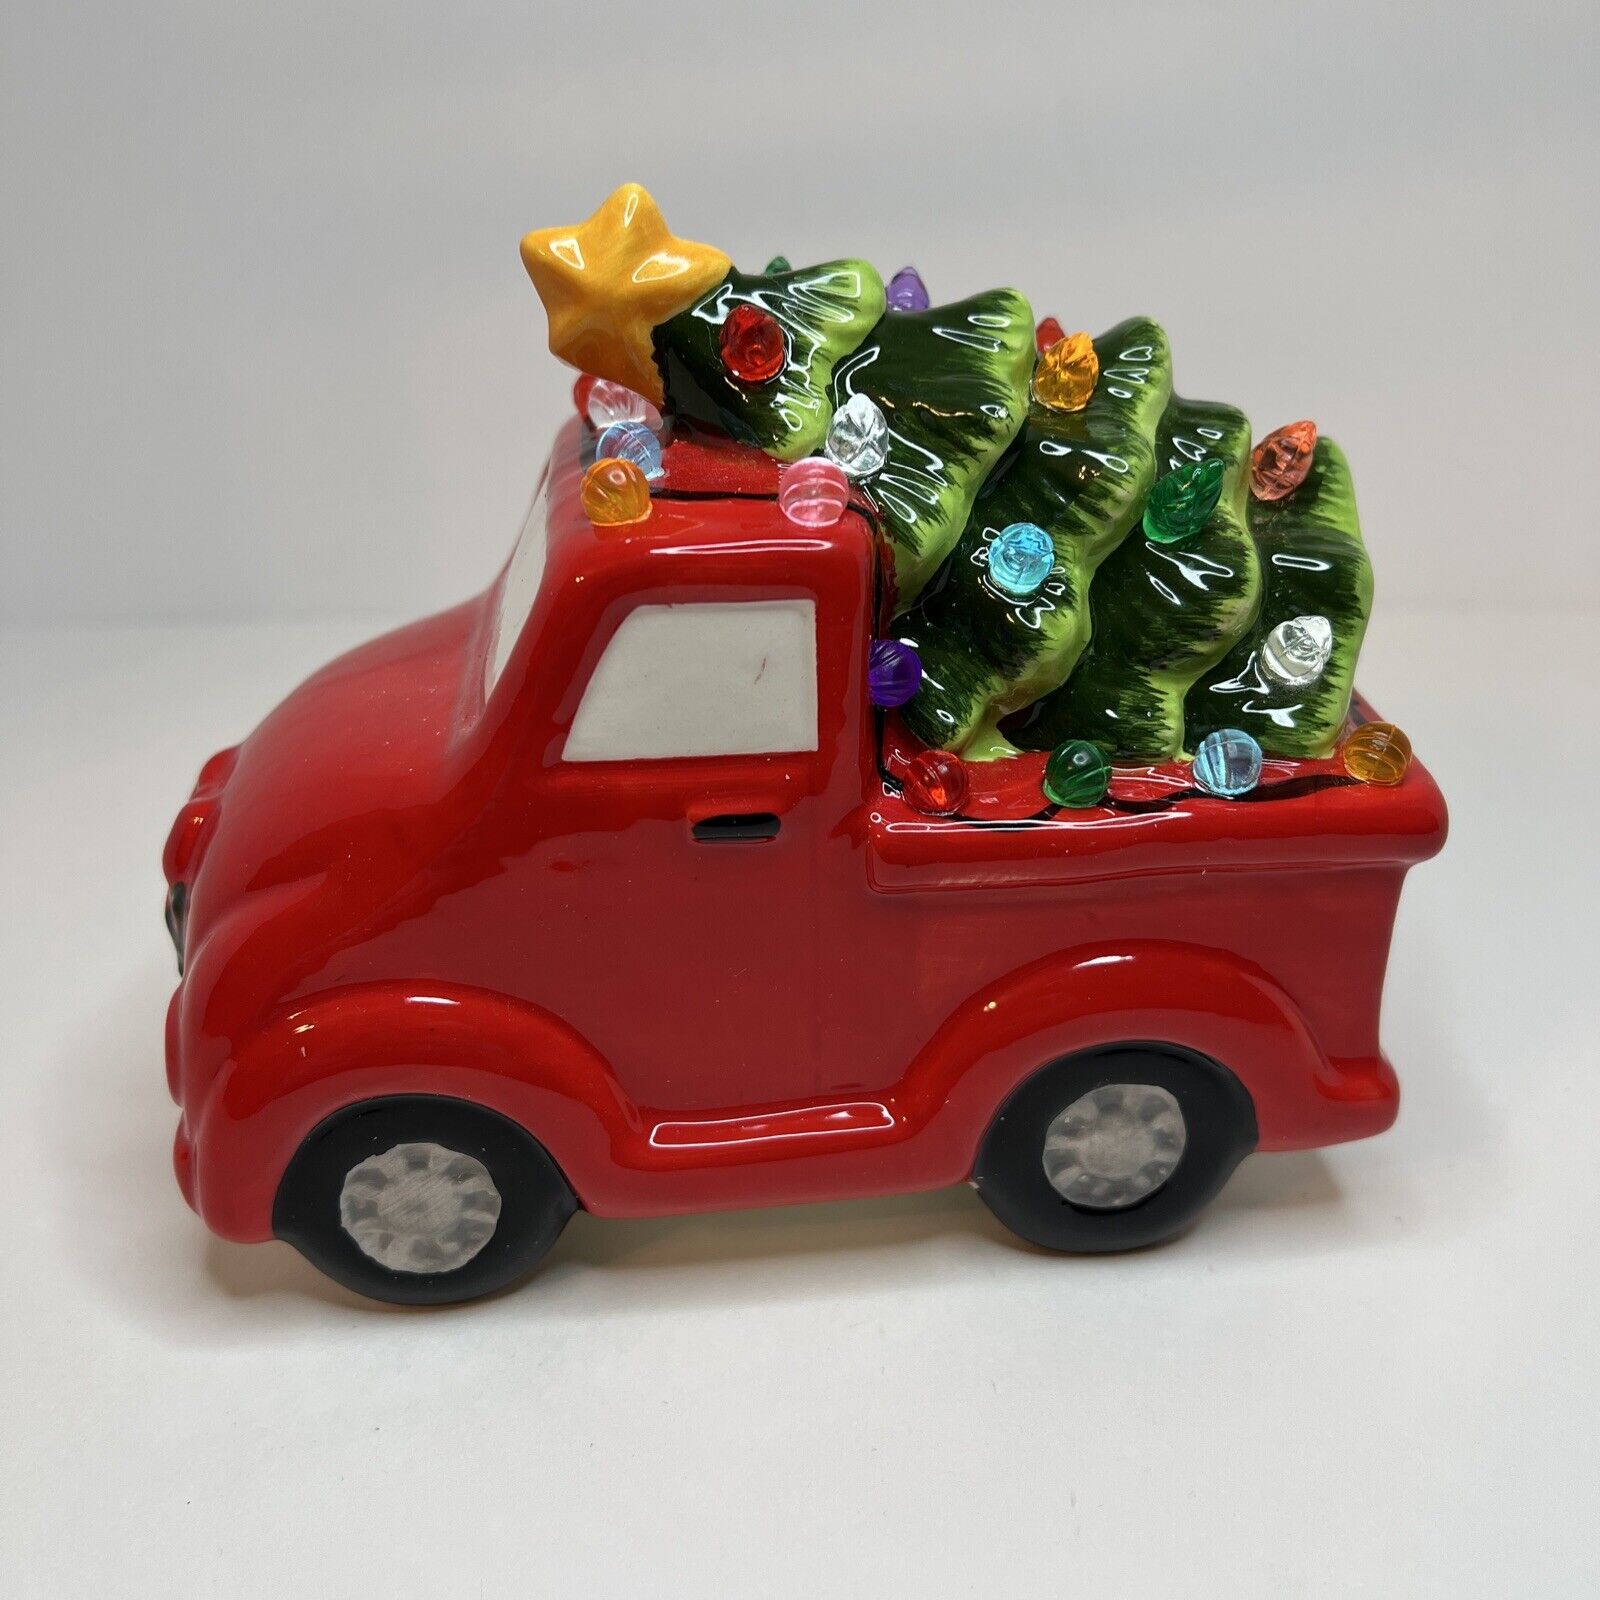 Ceramic Christmas Red Truck With Light Up Tree Nostalgia Small